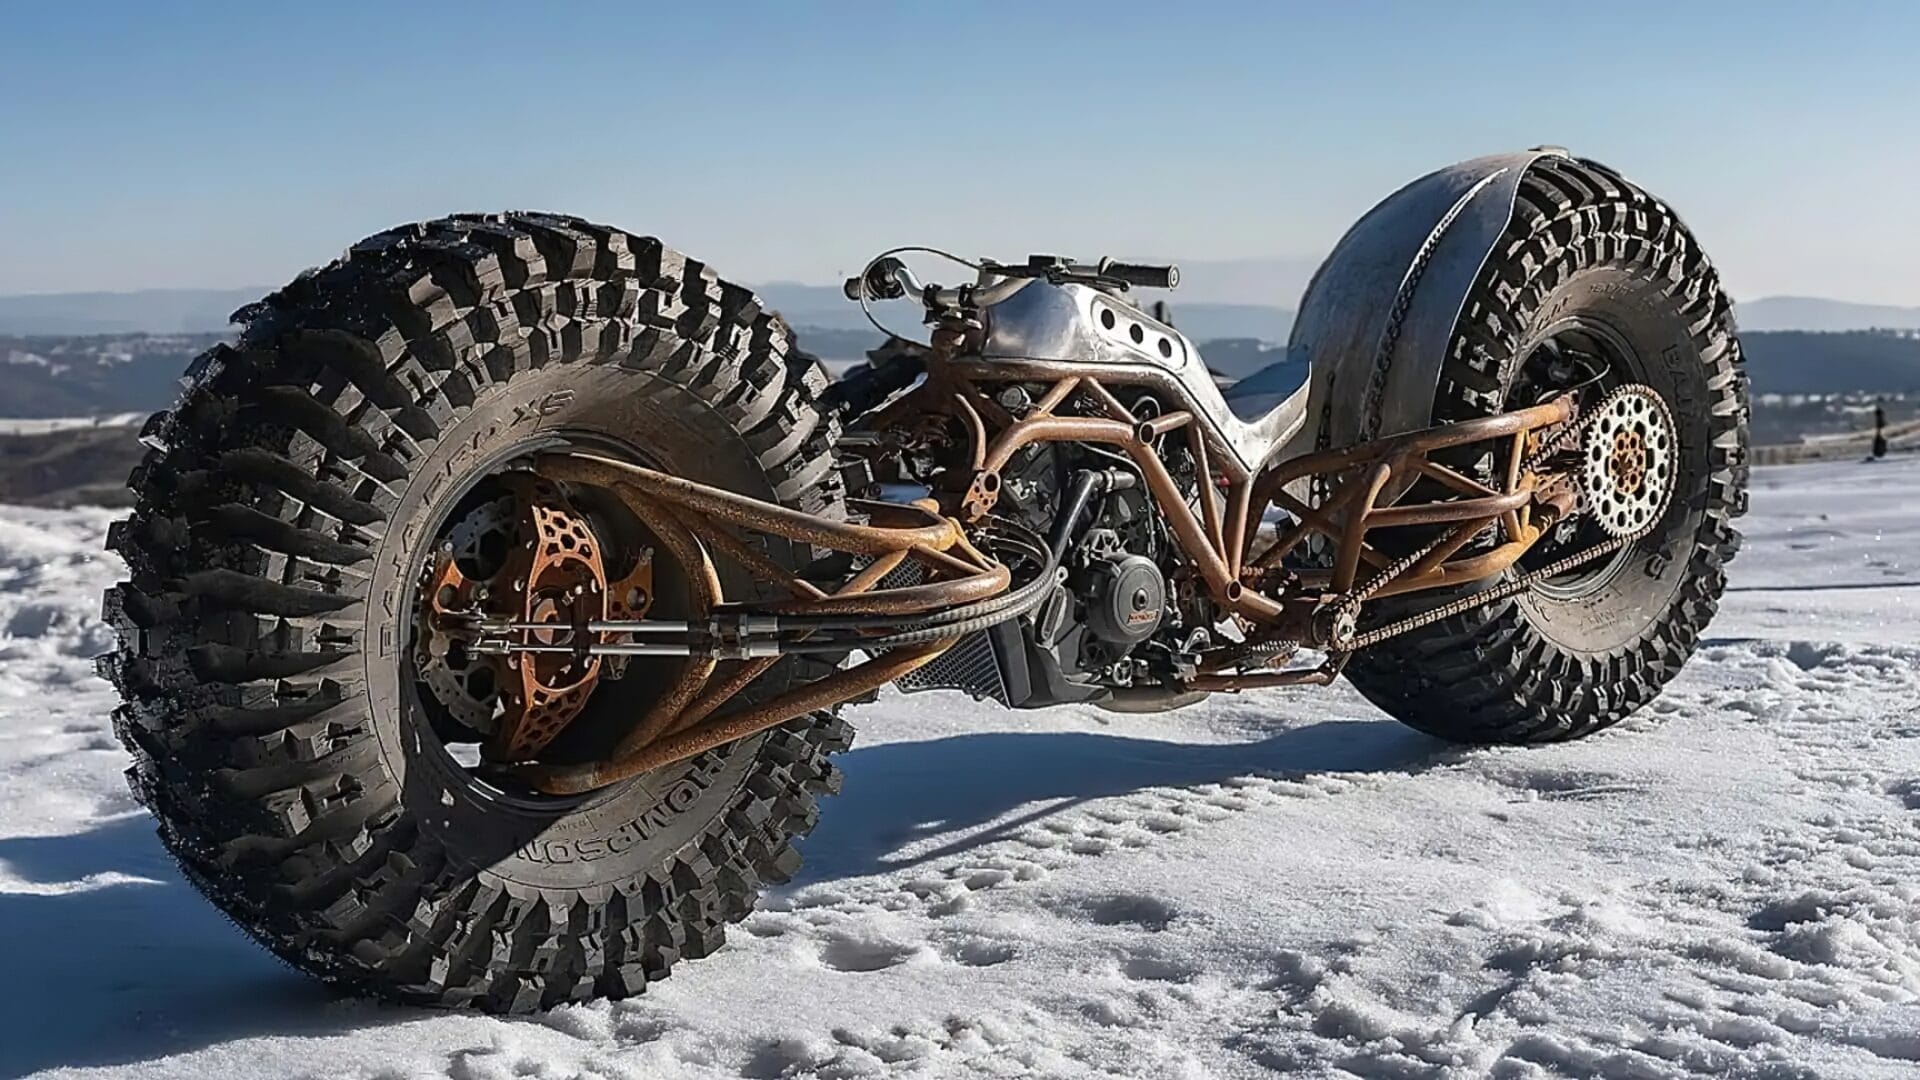 Monster Choppers: A masterpiece in the making